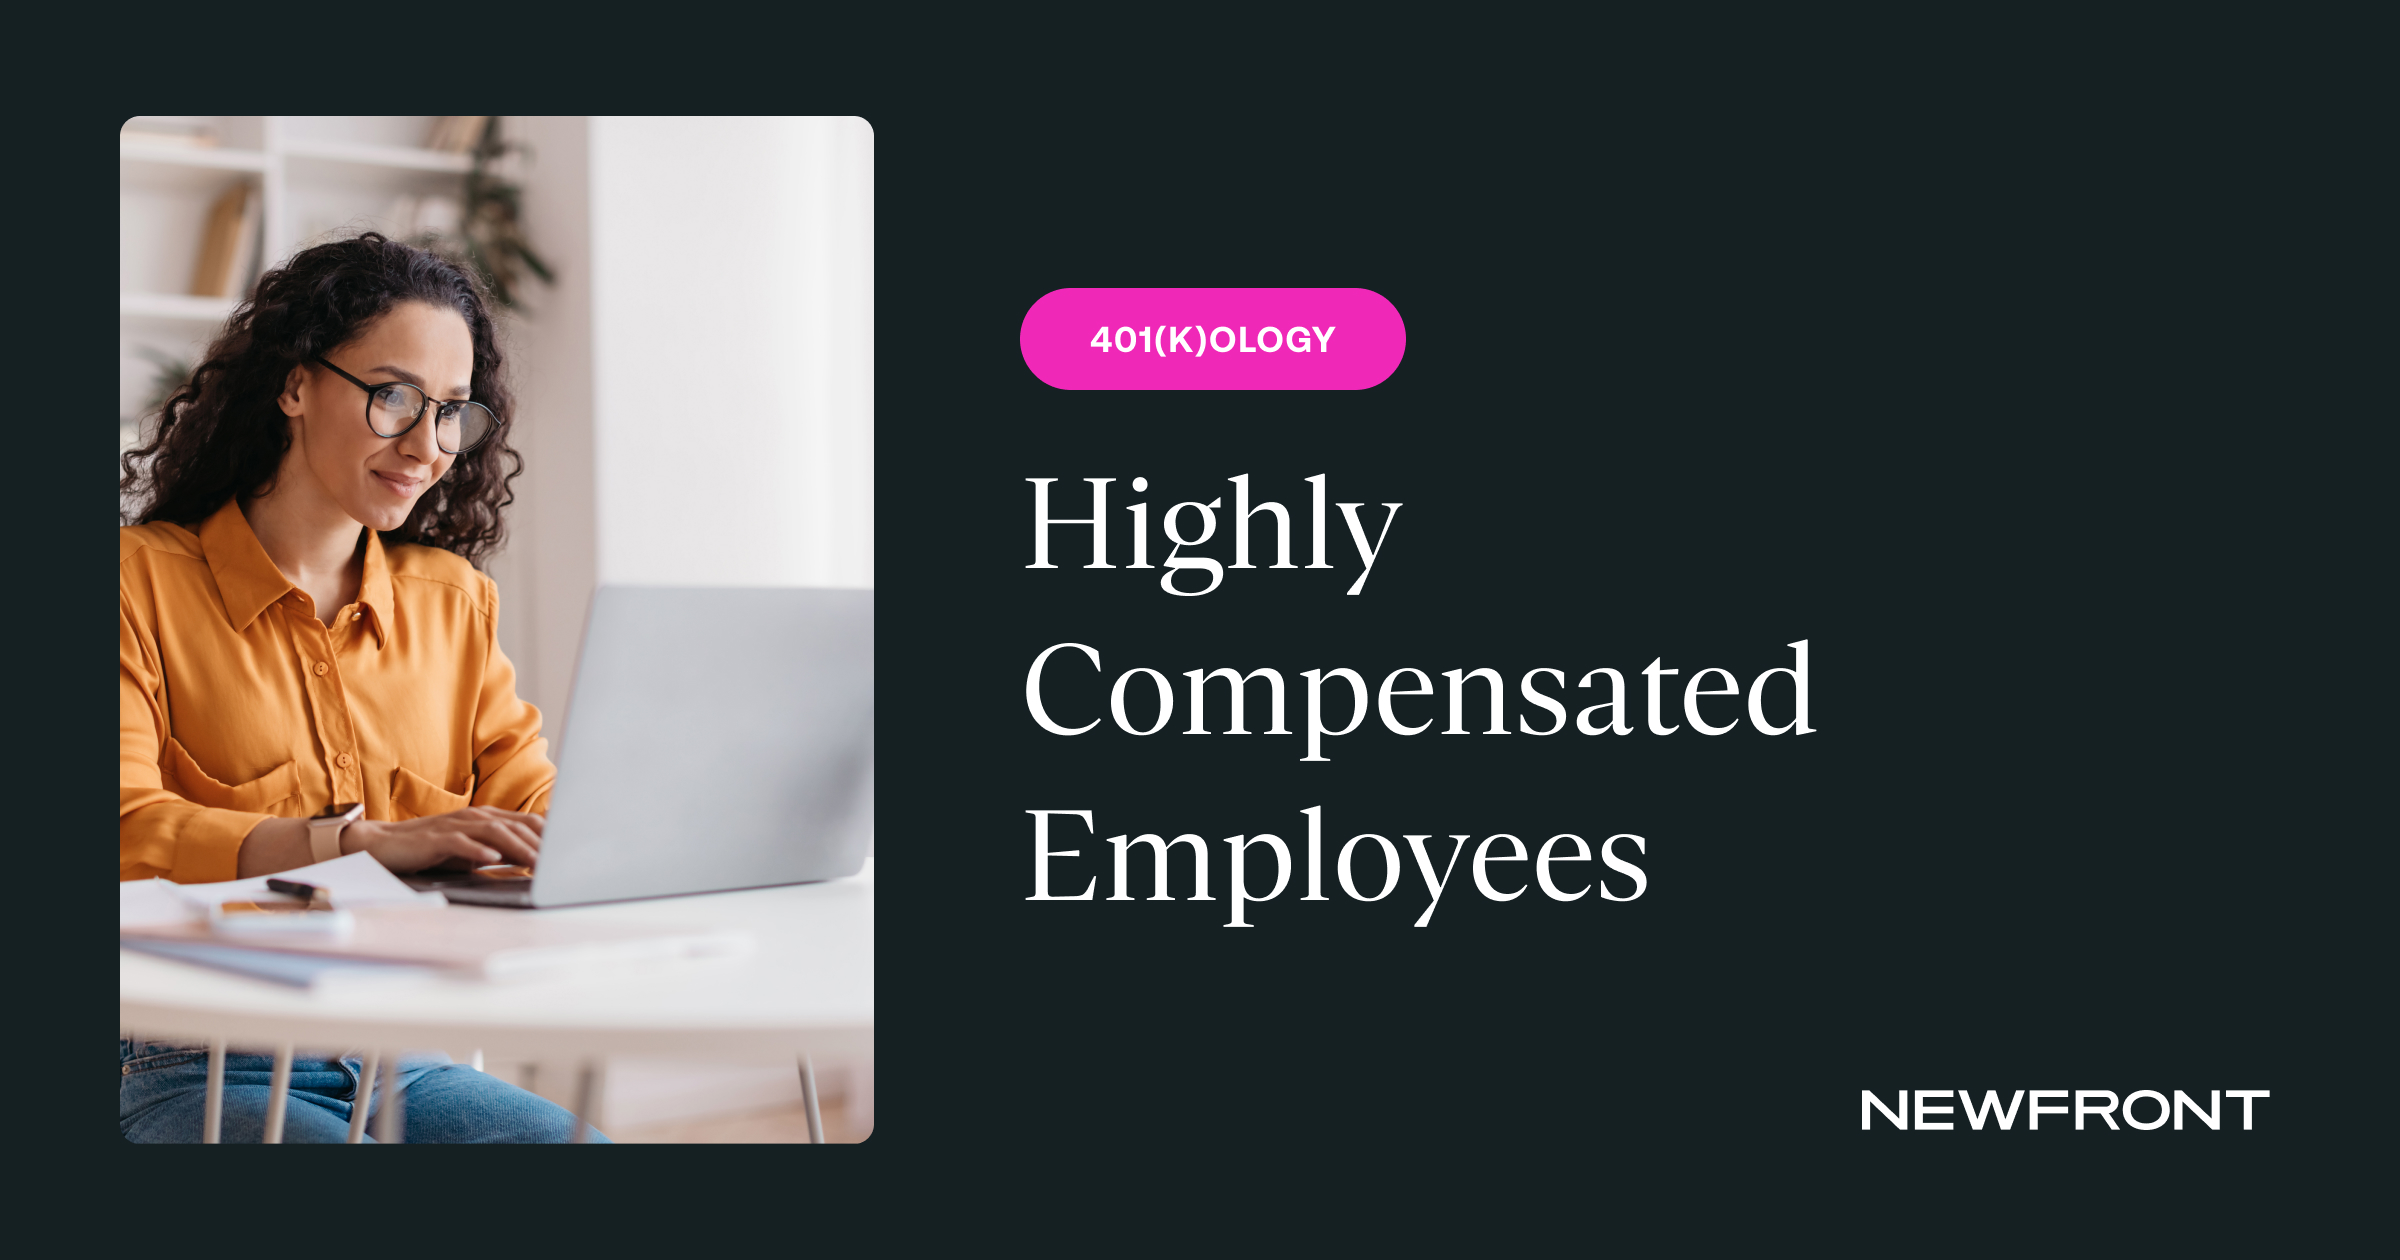 401(k)ology Highly Compensated Employees